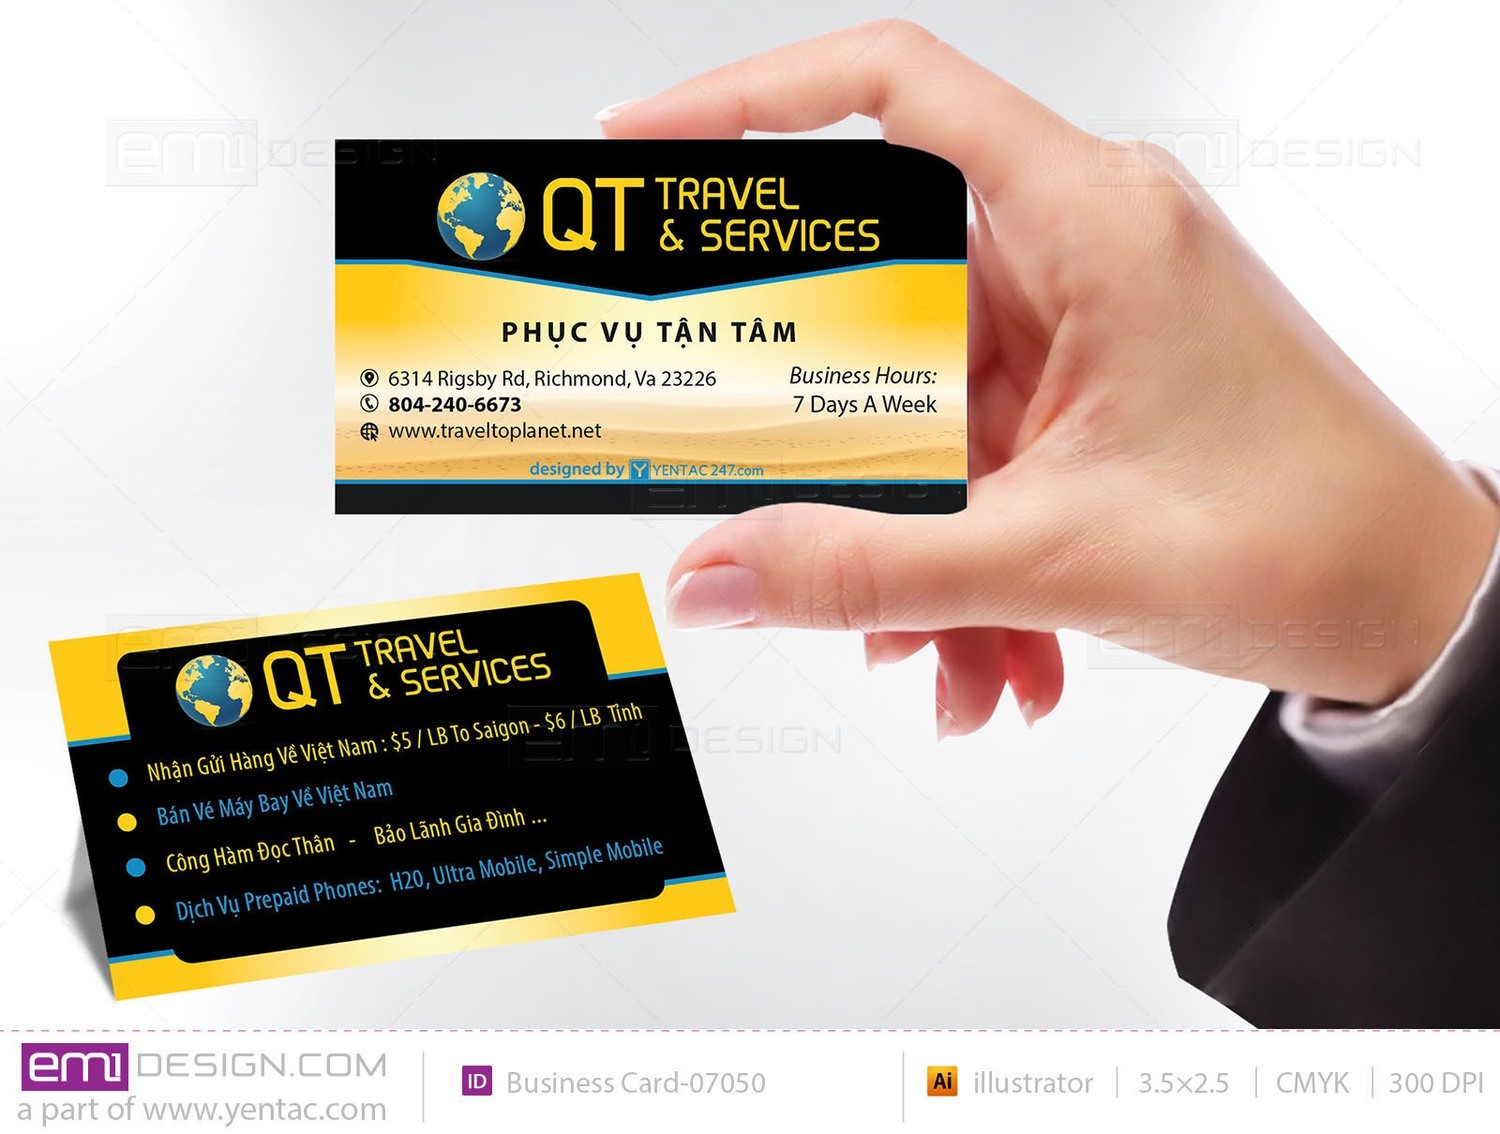 Business Card - Templates buscard-07050